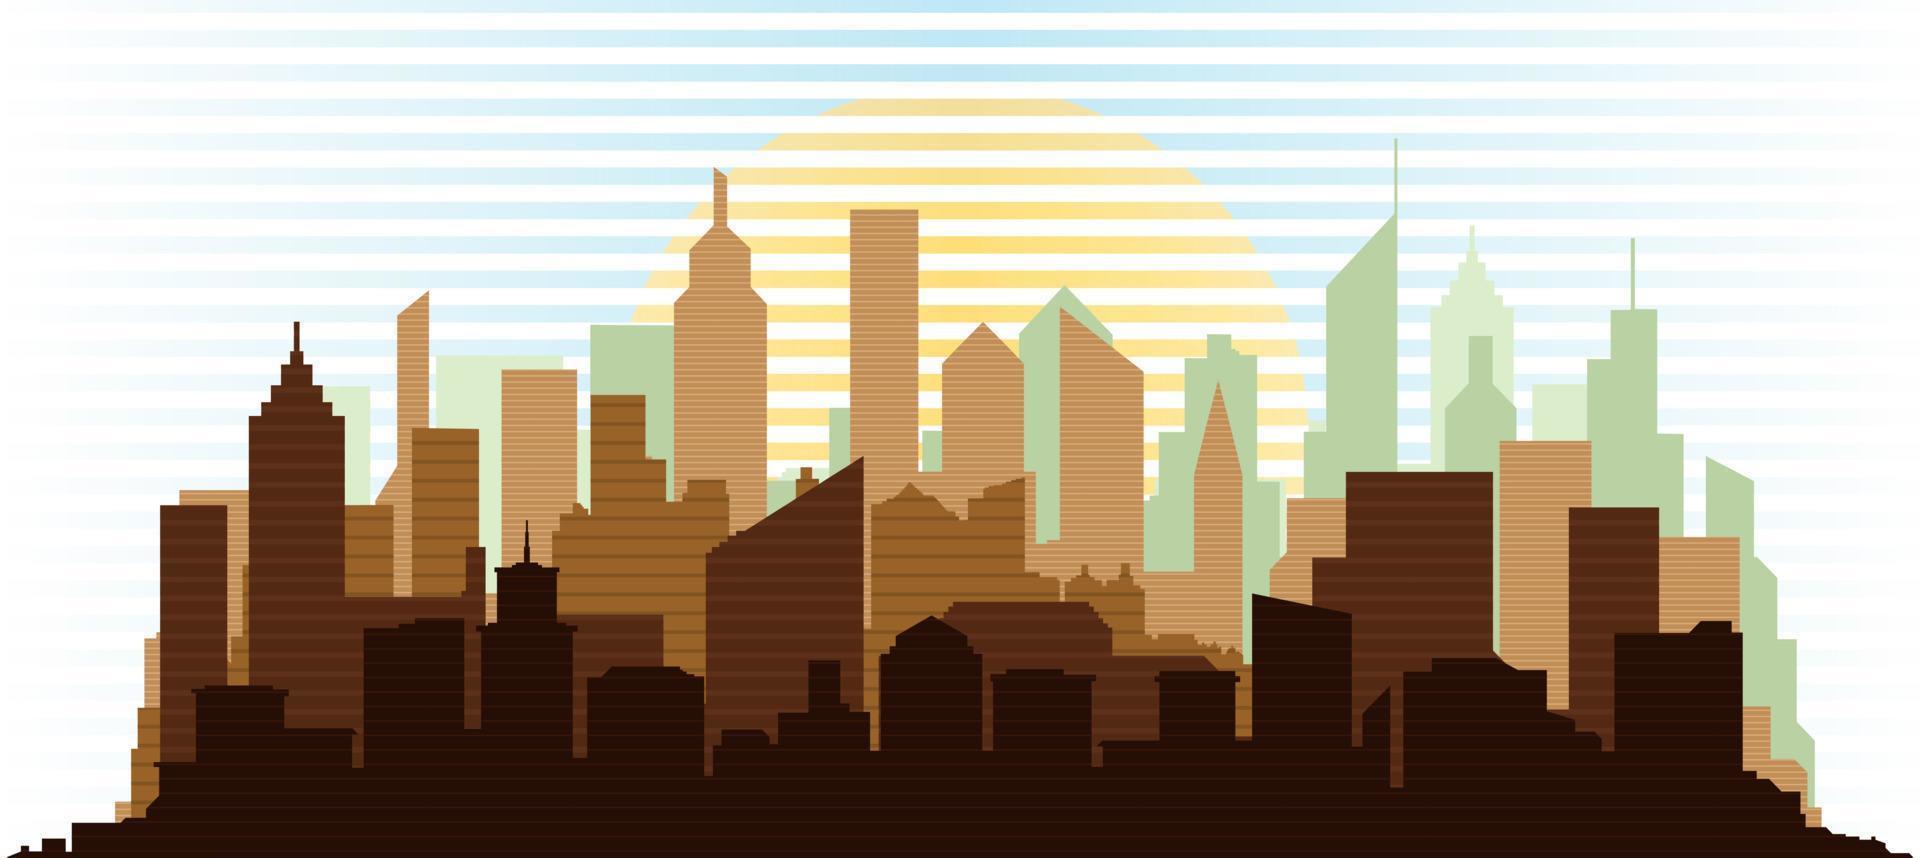 City landscape. Silhouette of the city. City landscape with skyscrapers and sunrise in a flat style. Retro Vector illustration